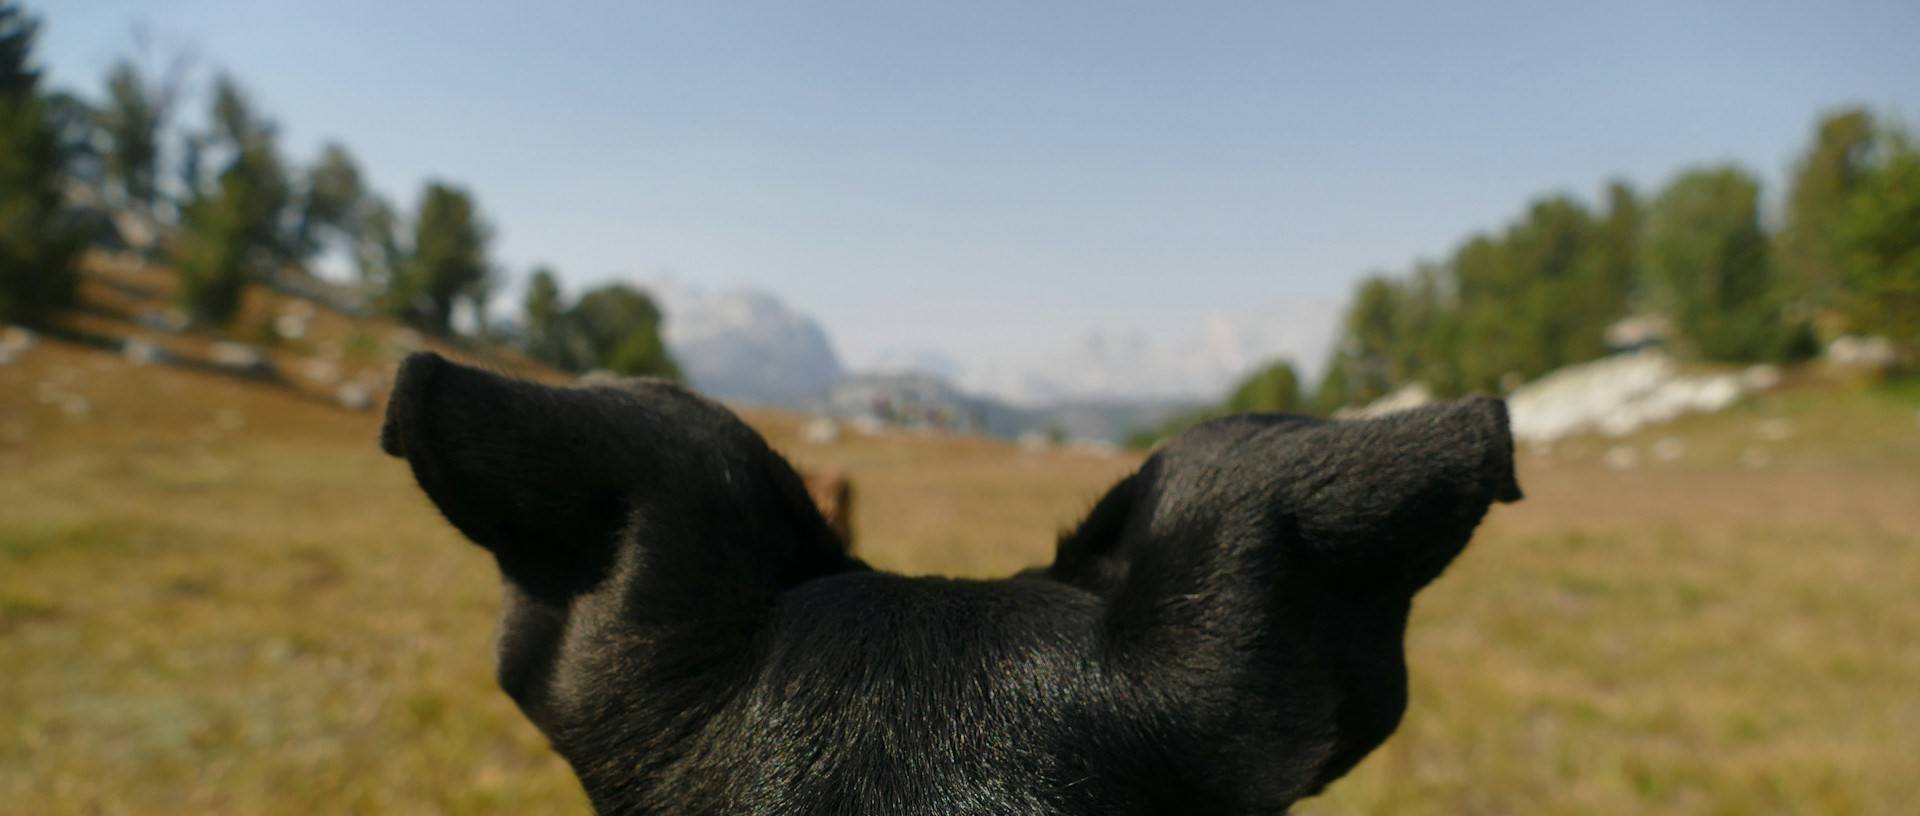 View from behind a dog's ears